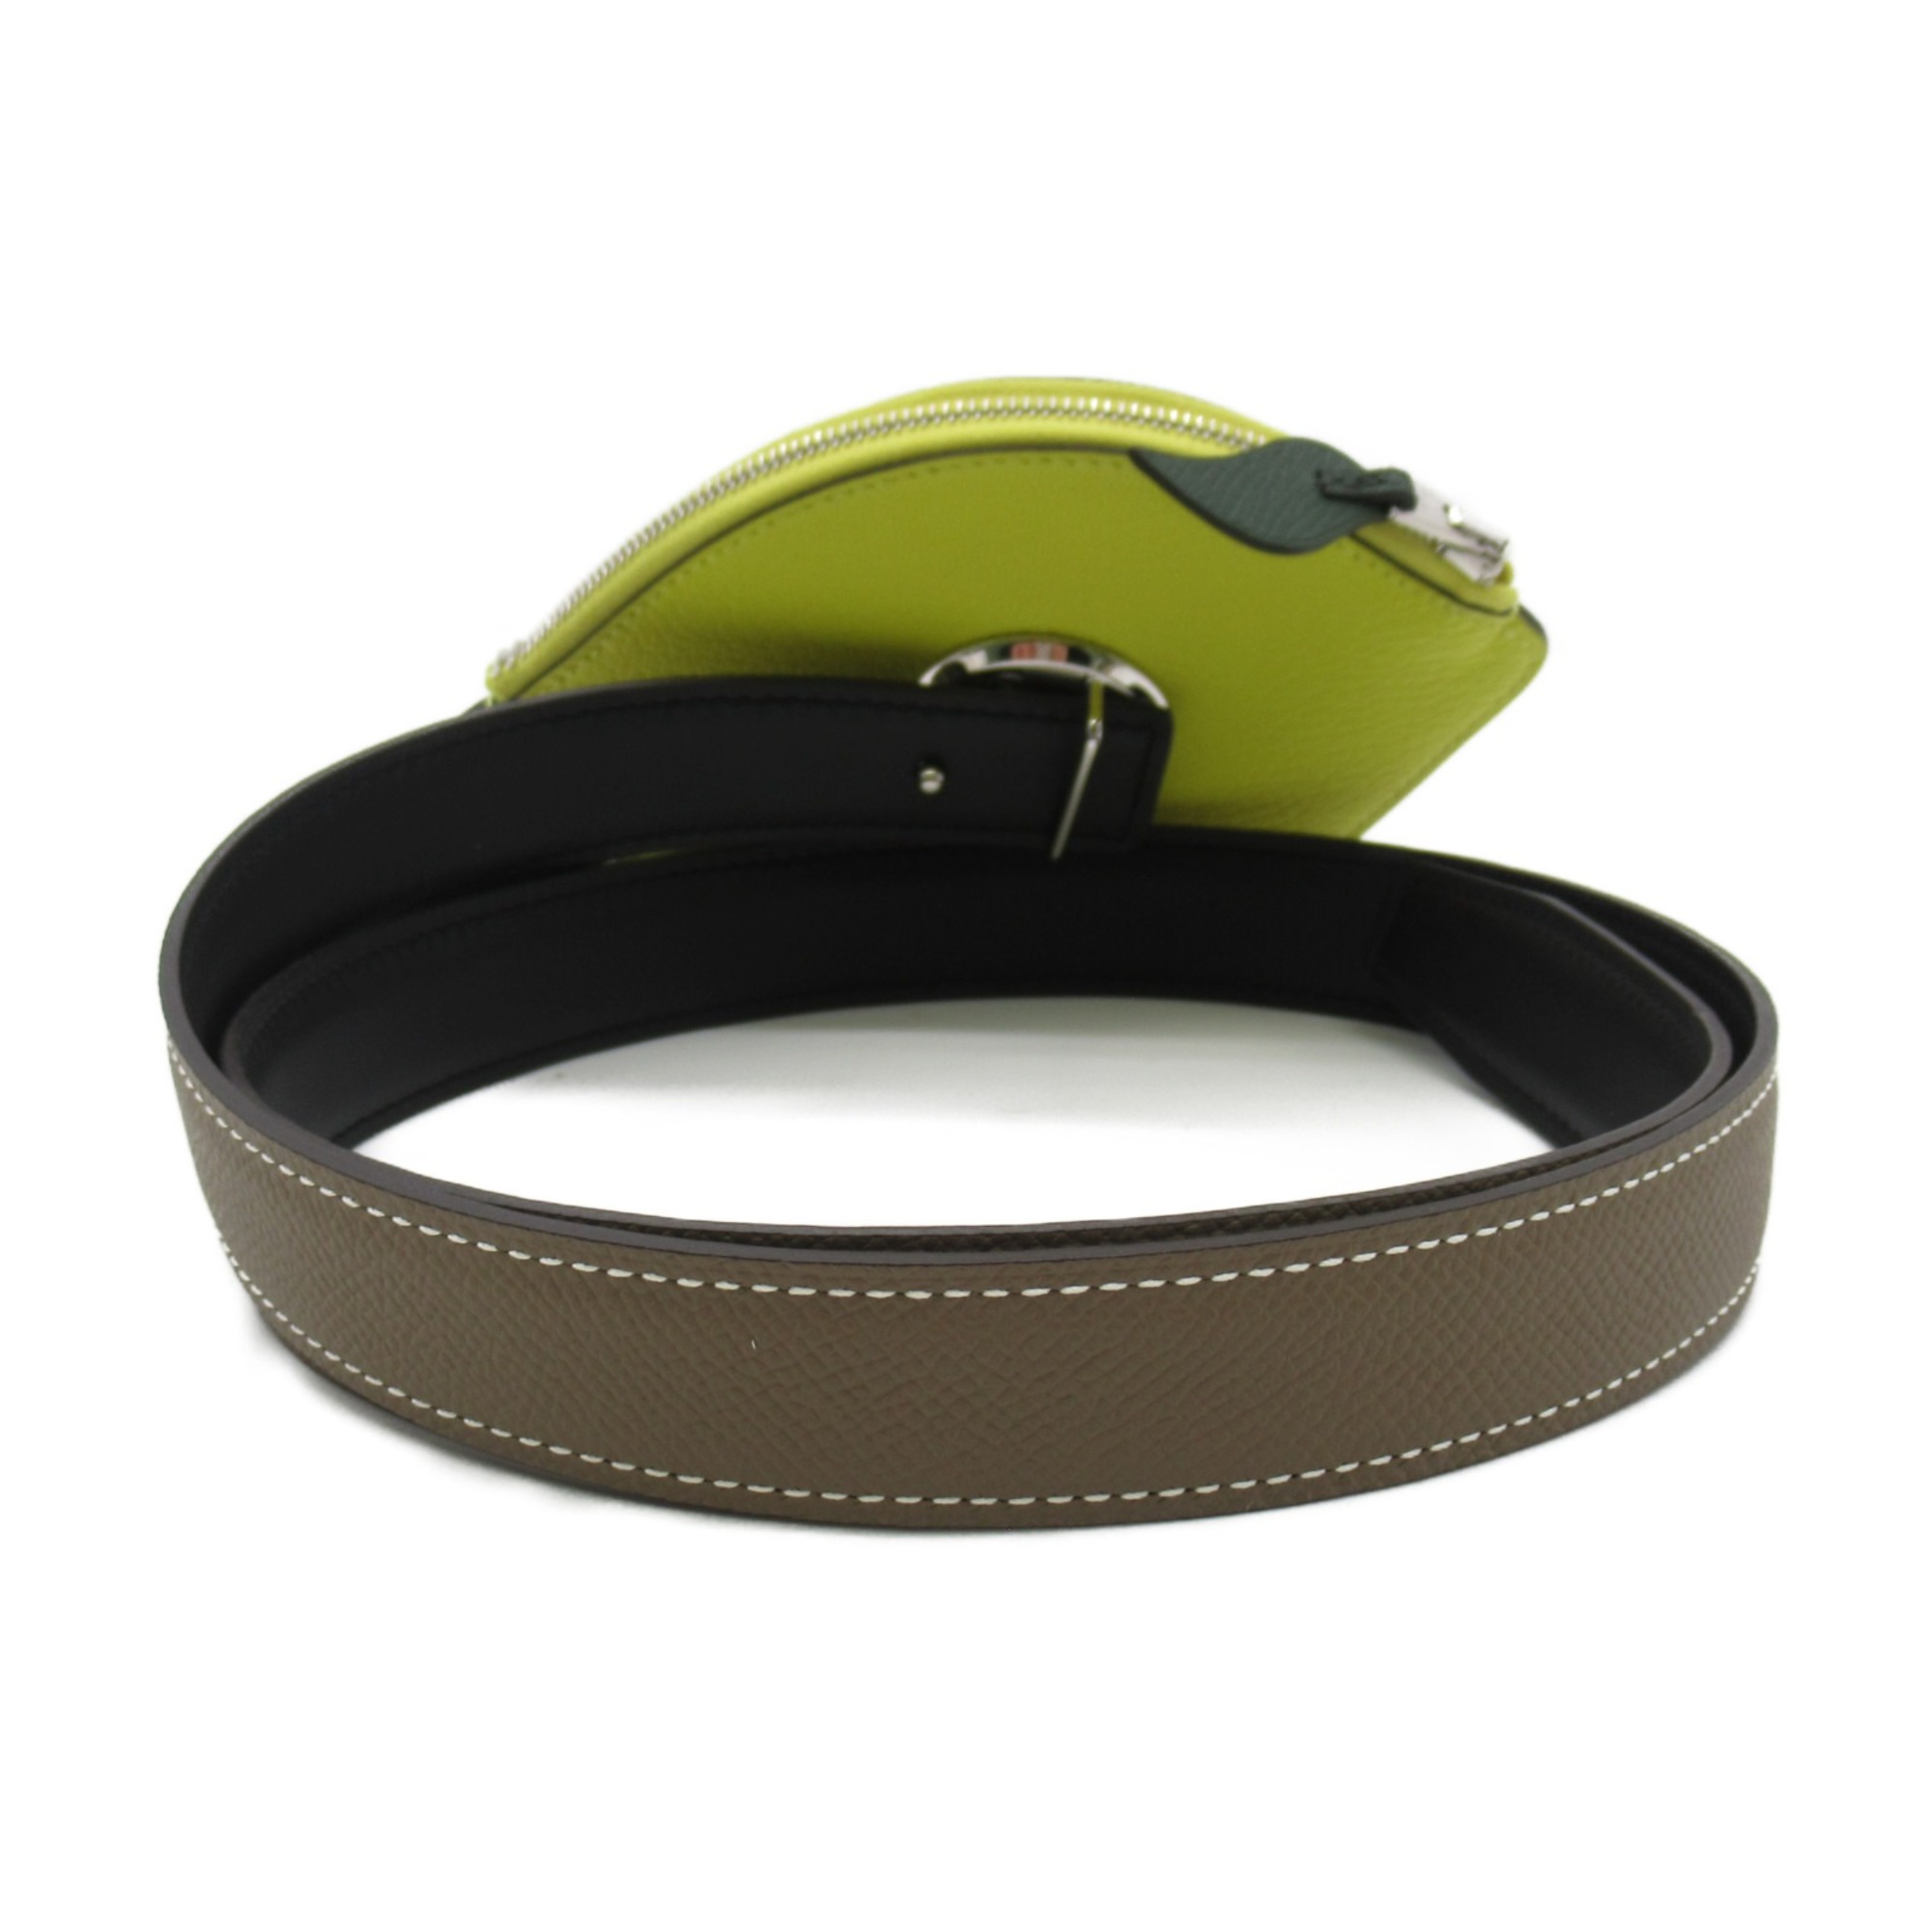 HERMES Belt with lemon pouch Yellow Brown Black Etoupe Grey leather